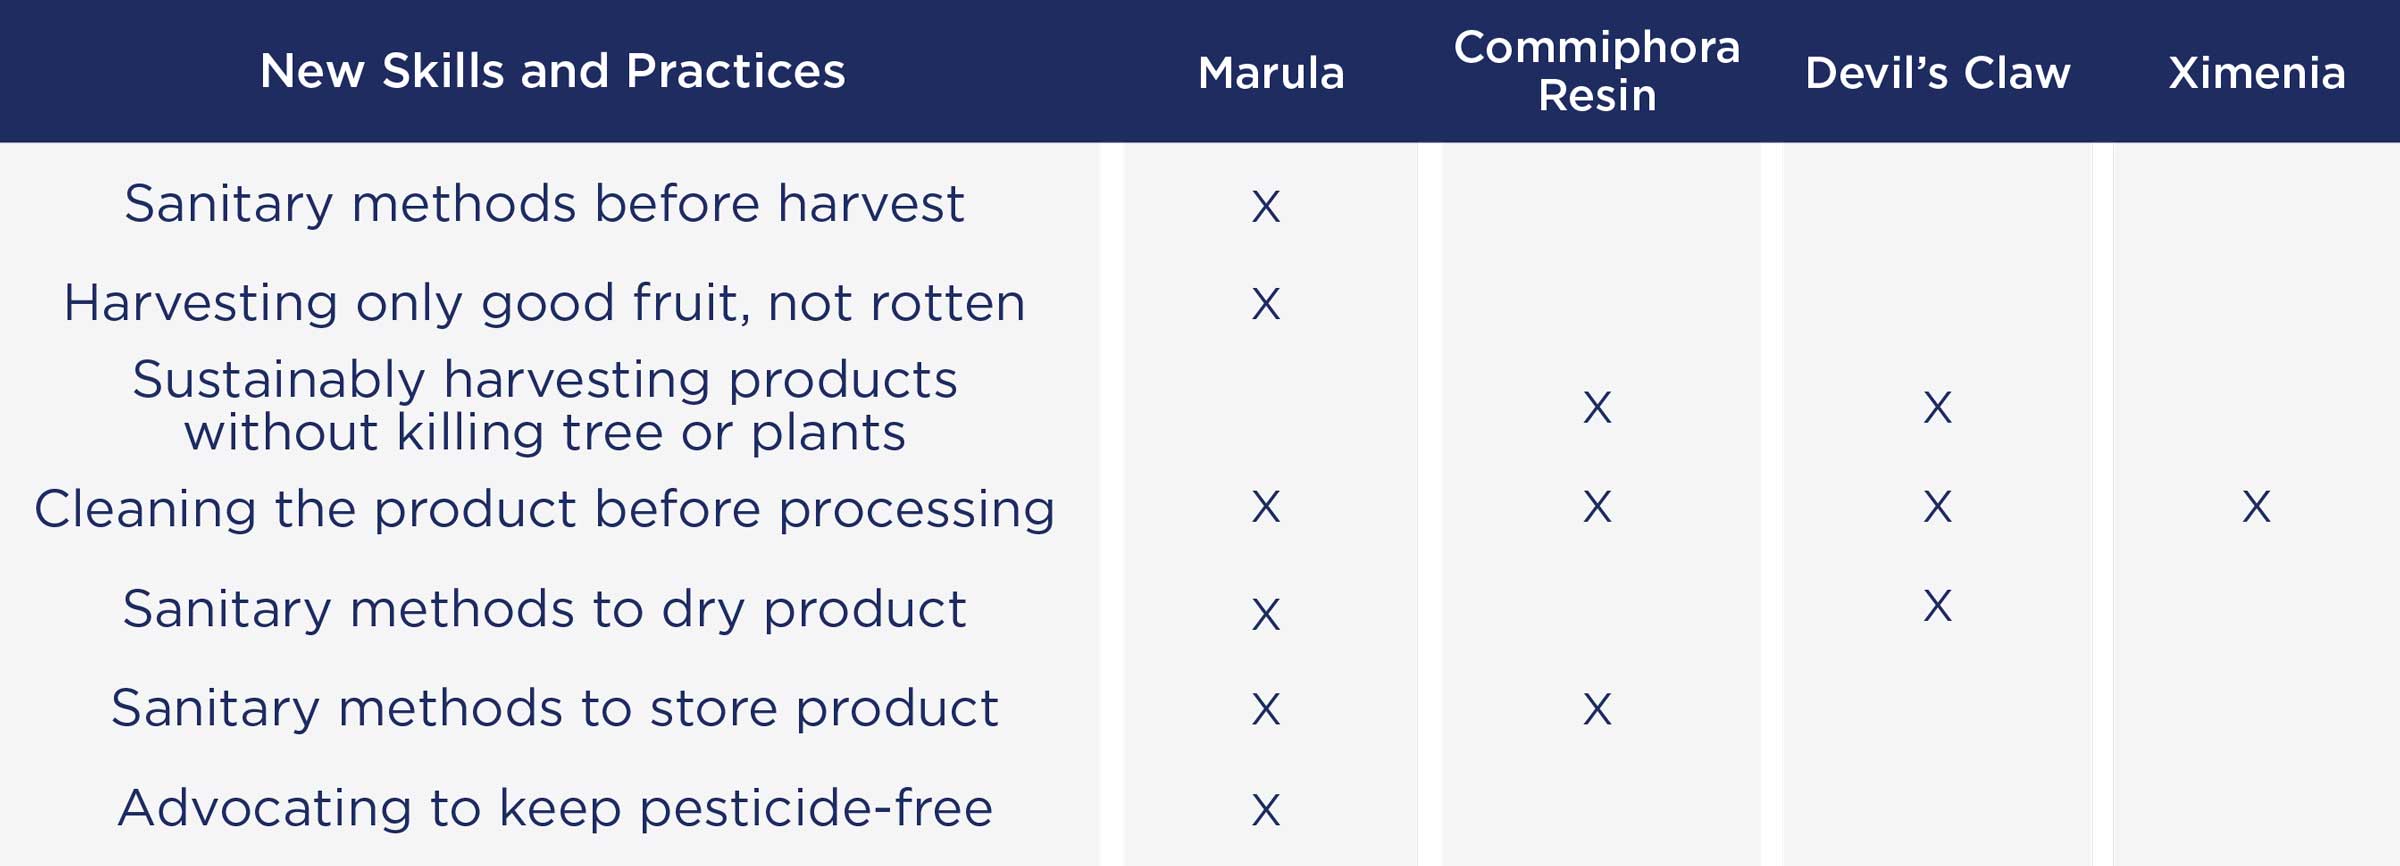 Table detailing that based on qualitative and quantitative data, training of harvesters is correlated with improved practice.